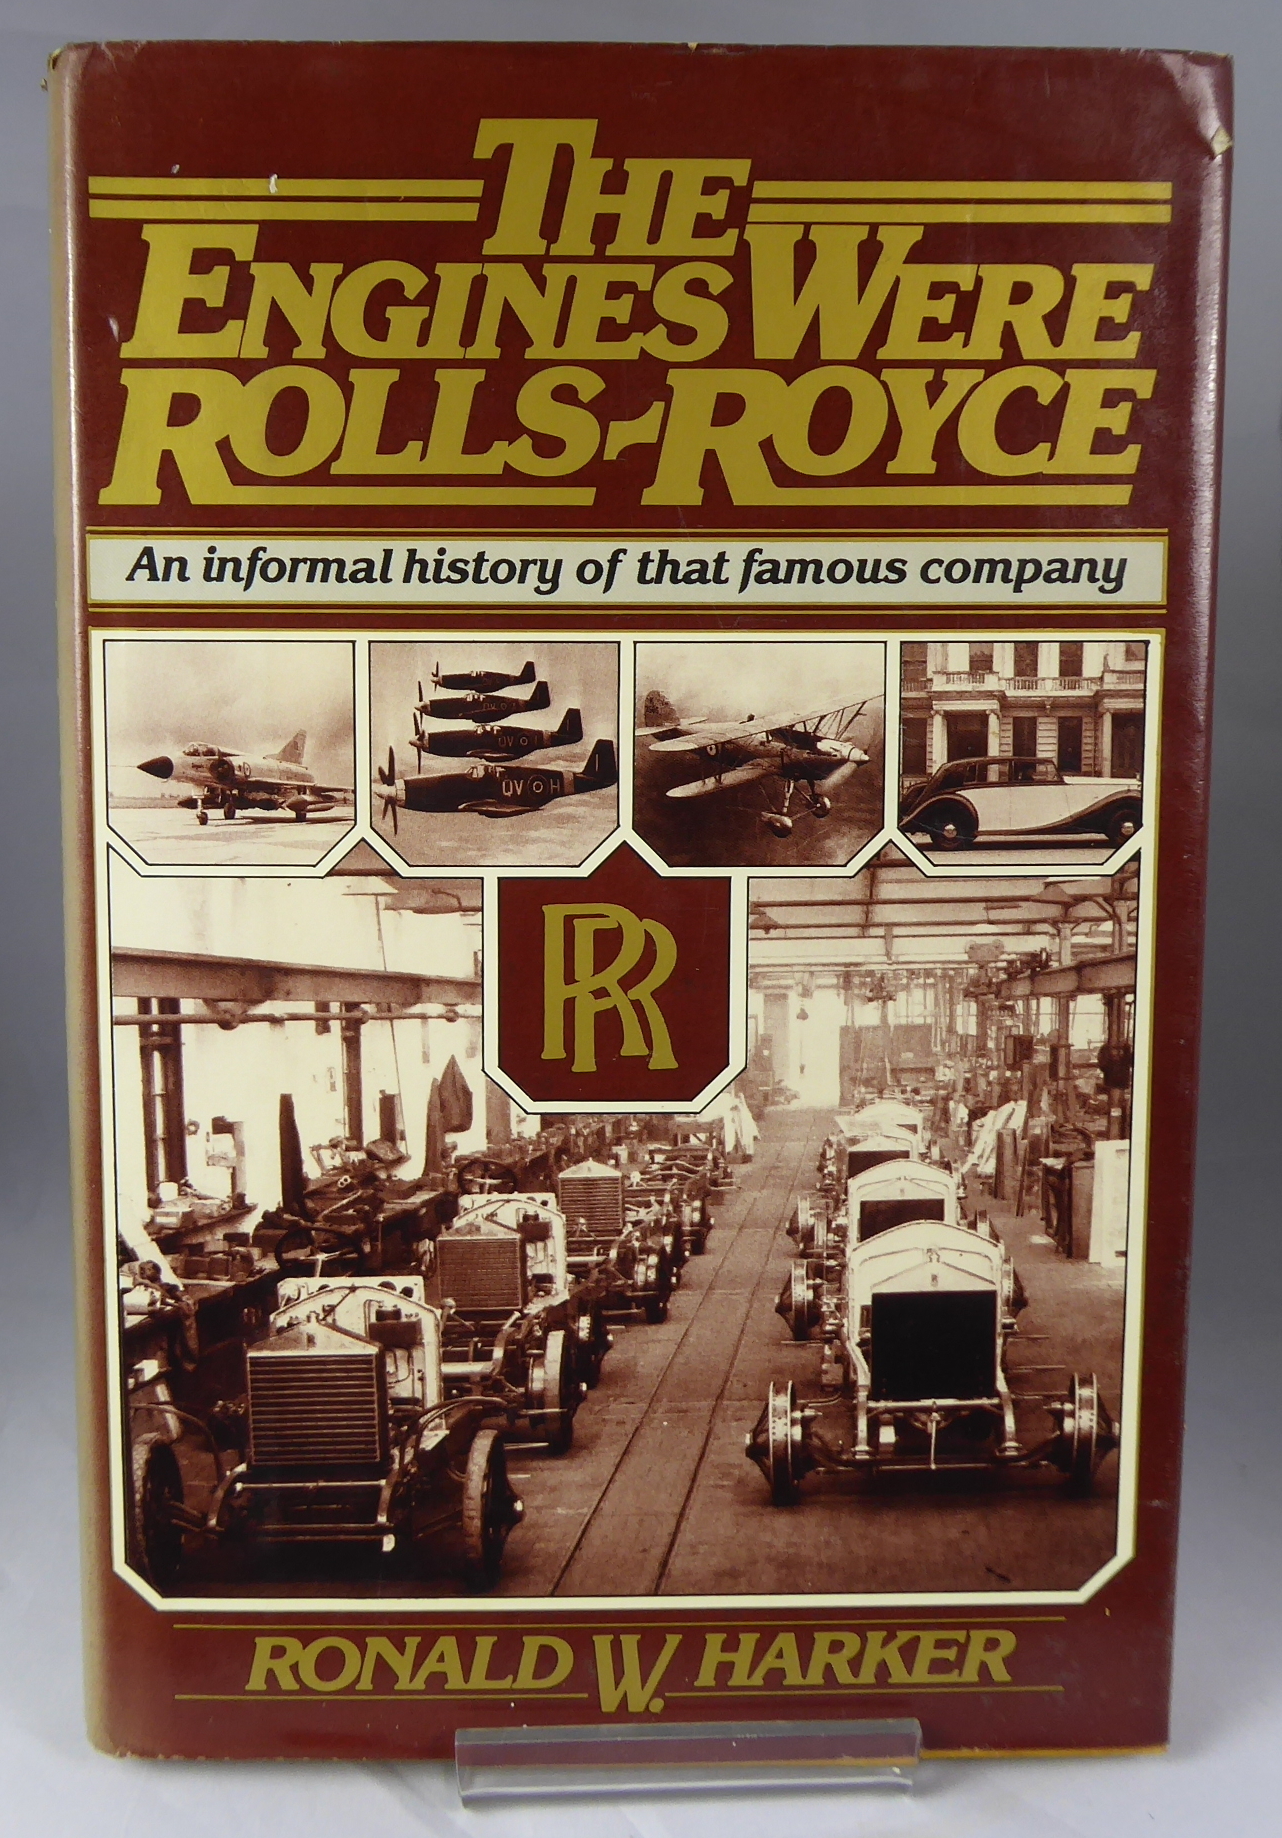 HARKER, RONALD W - The Engines Were Rolls-Royce. An Informal History of That Famous Company.